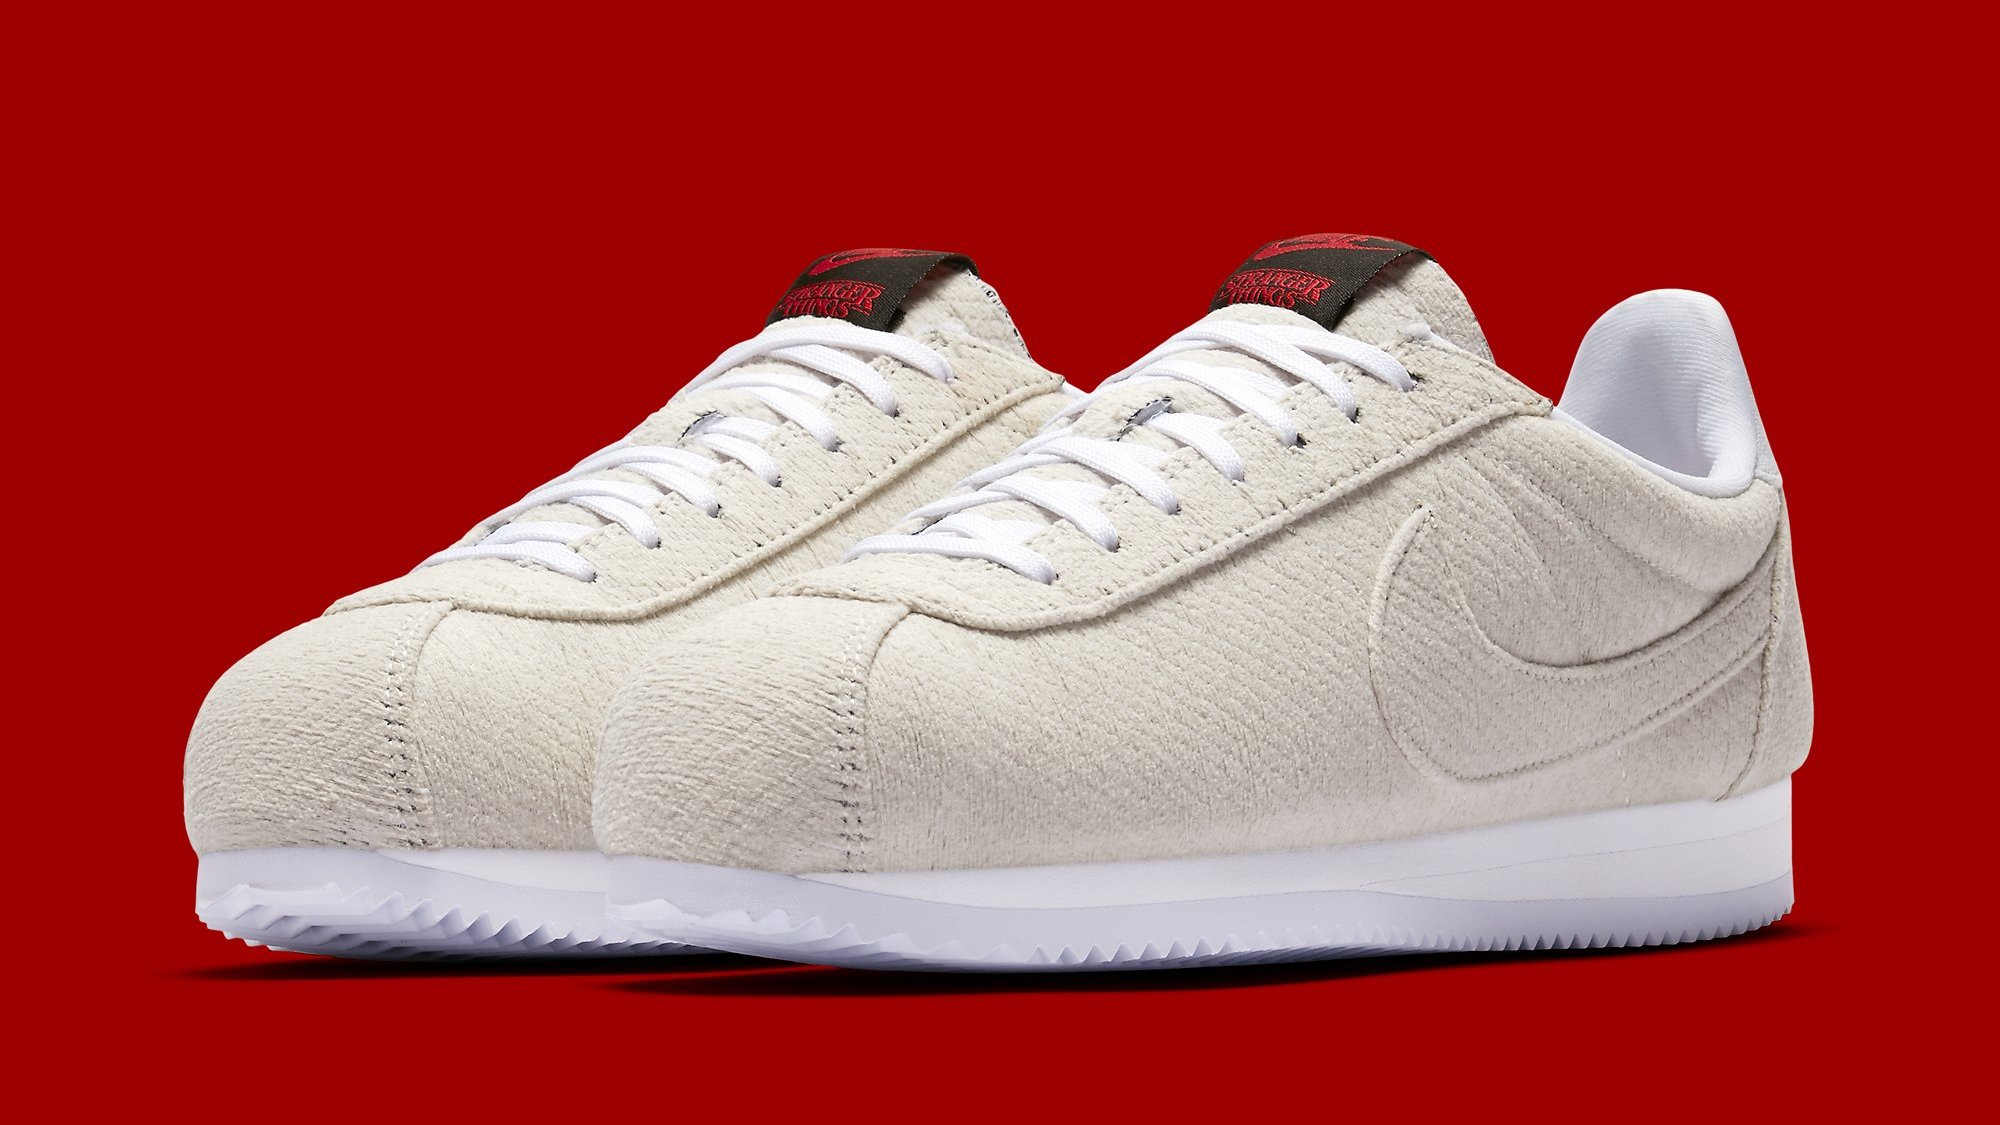 Gevlekt wazig Arena The Starcourt Mall Inspires the Latest 'Stranger Things' x Nike Cortez |  Complex